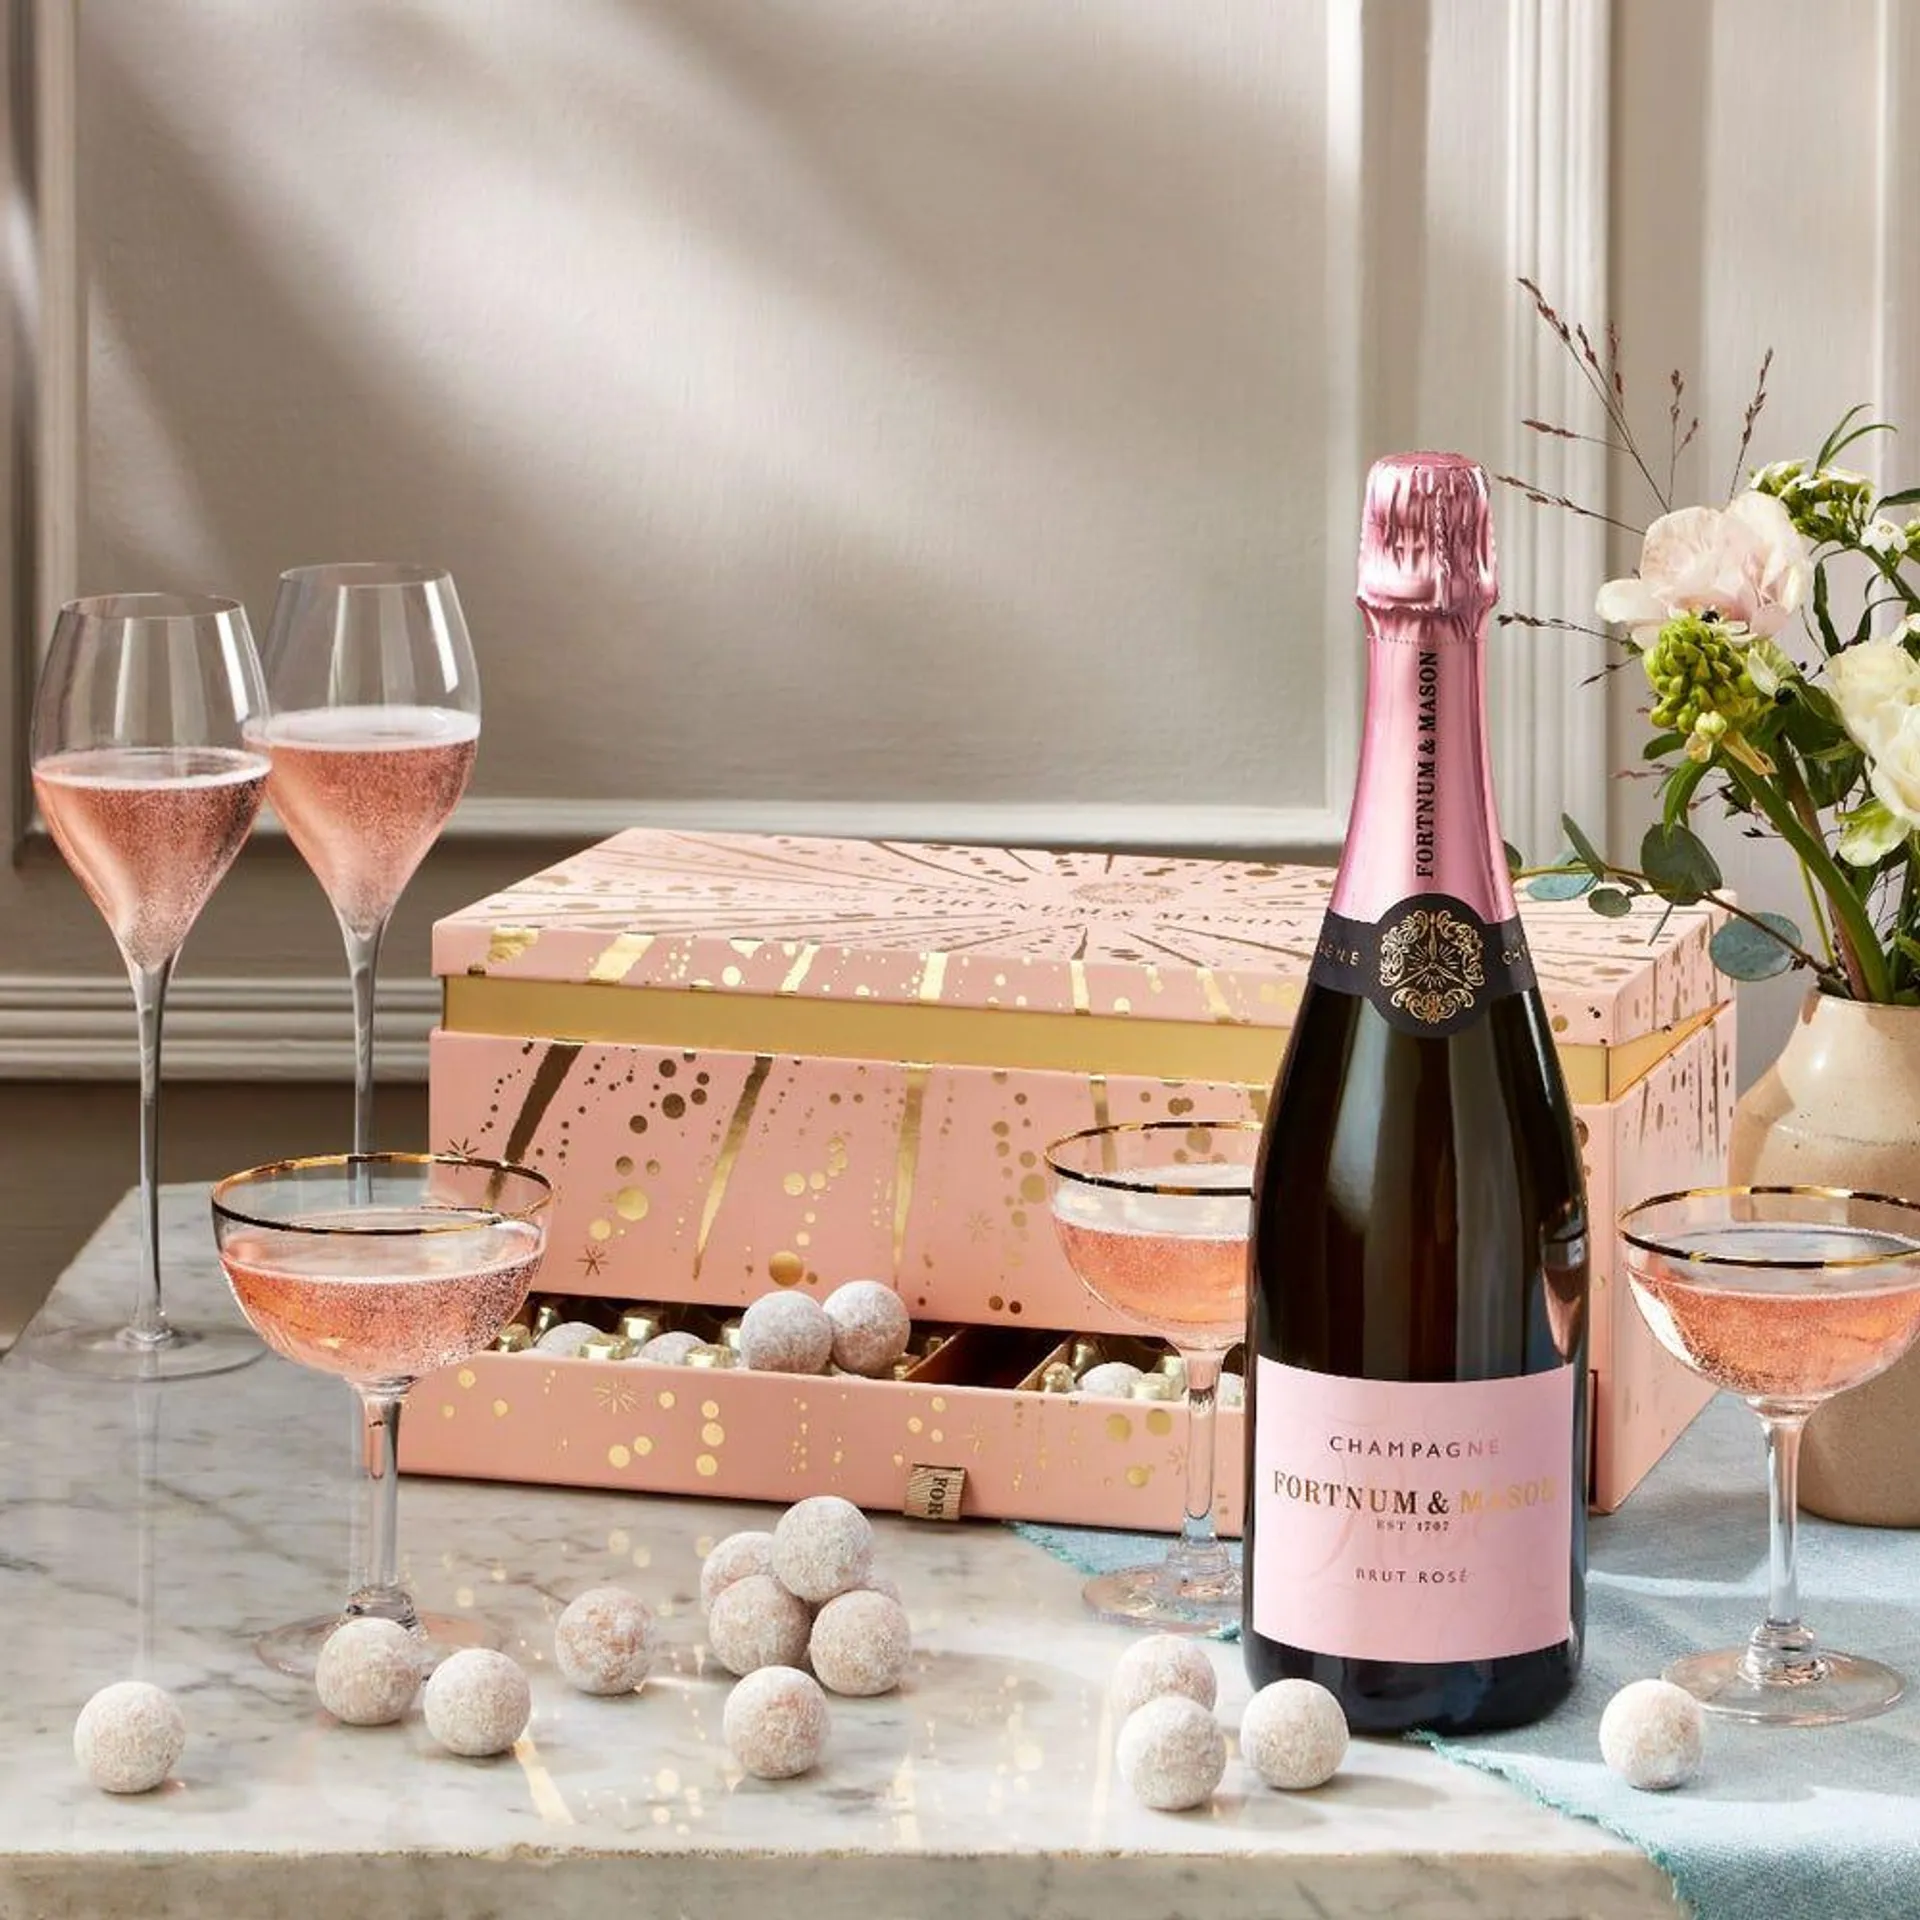 The Rosé Champagne & Chocolate Gift Box